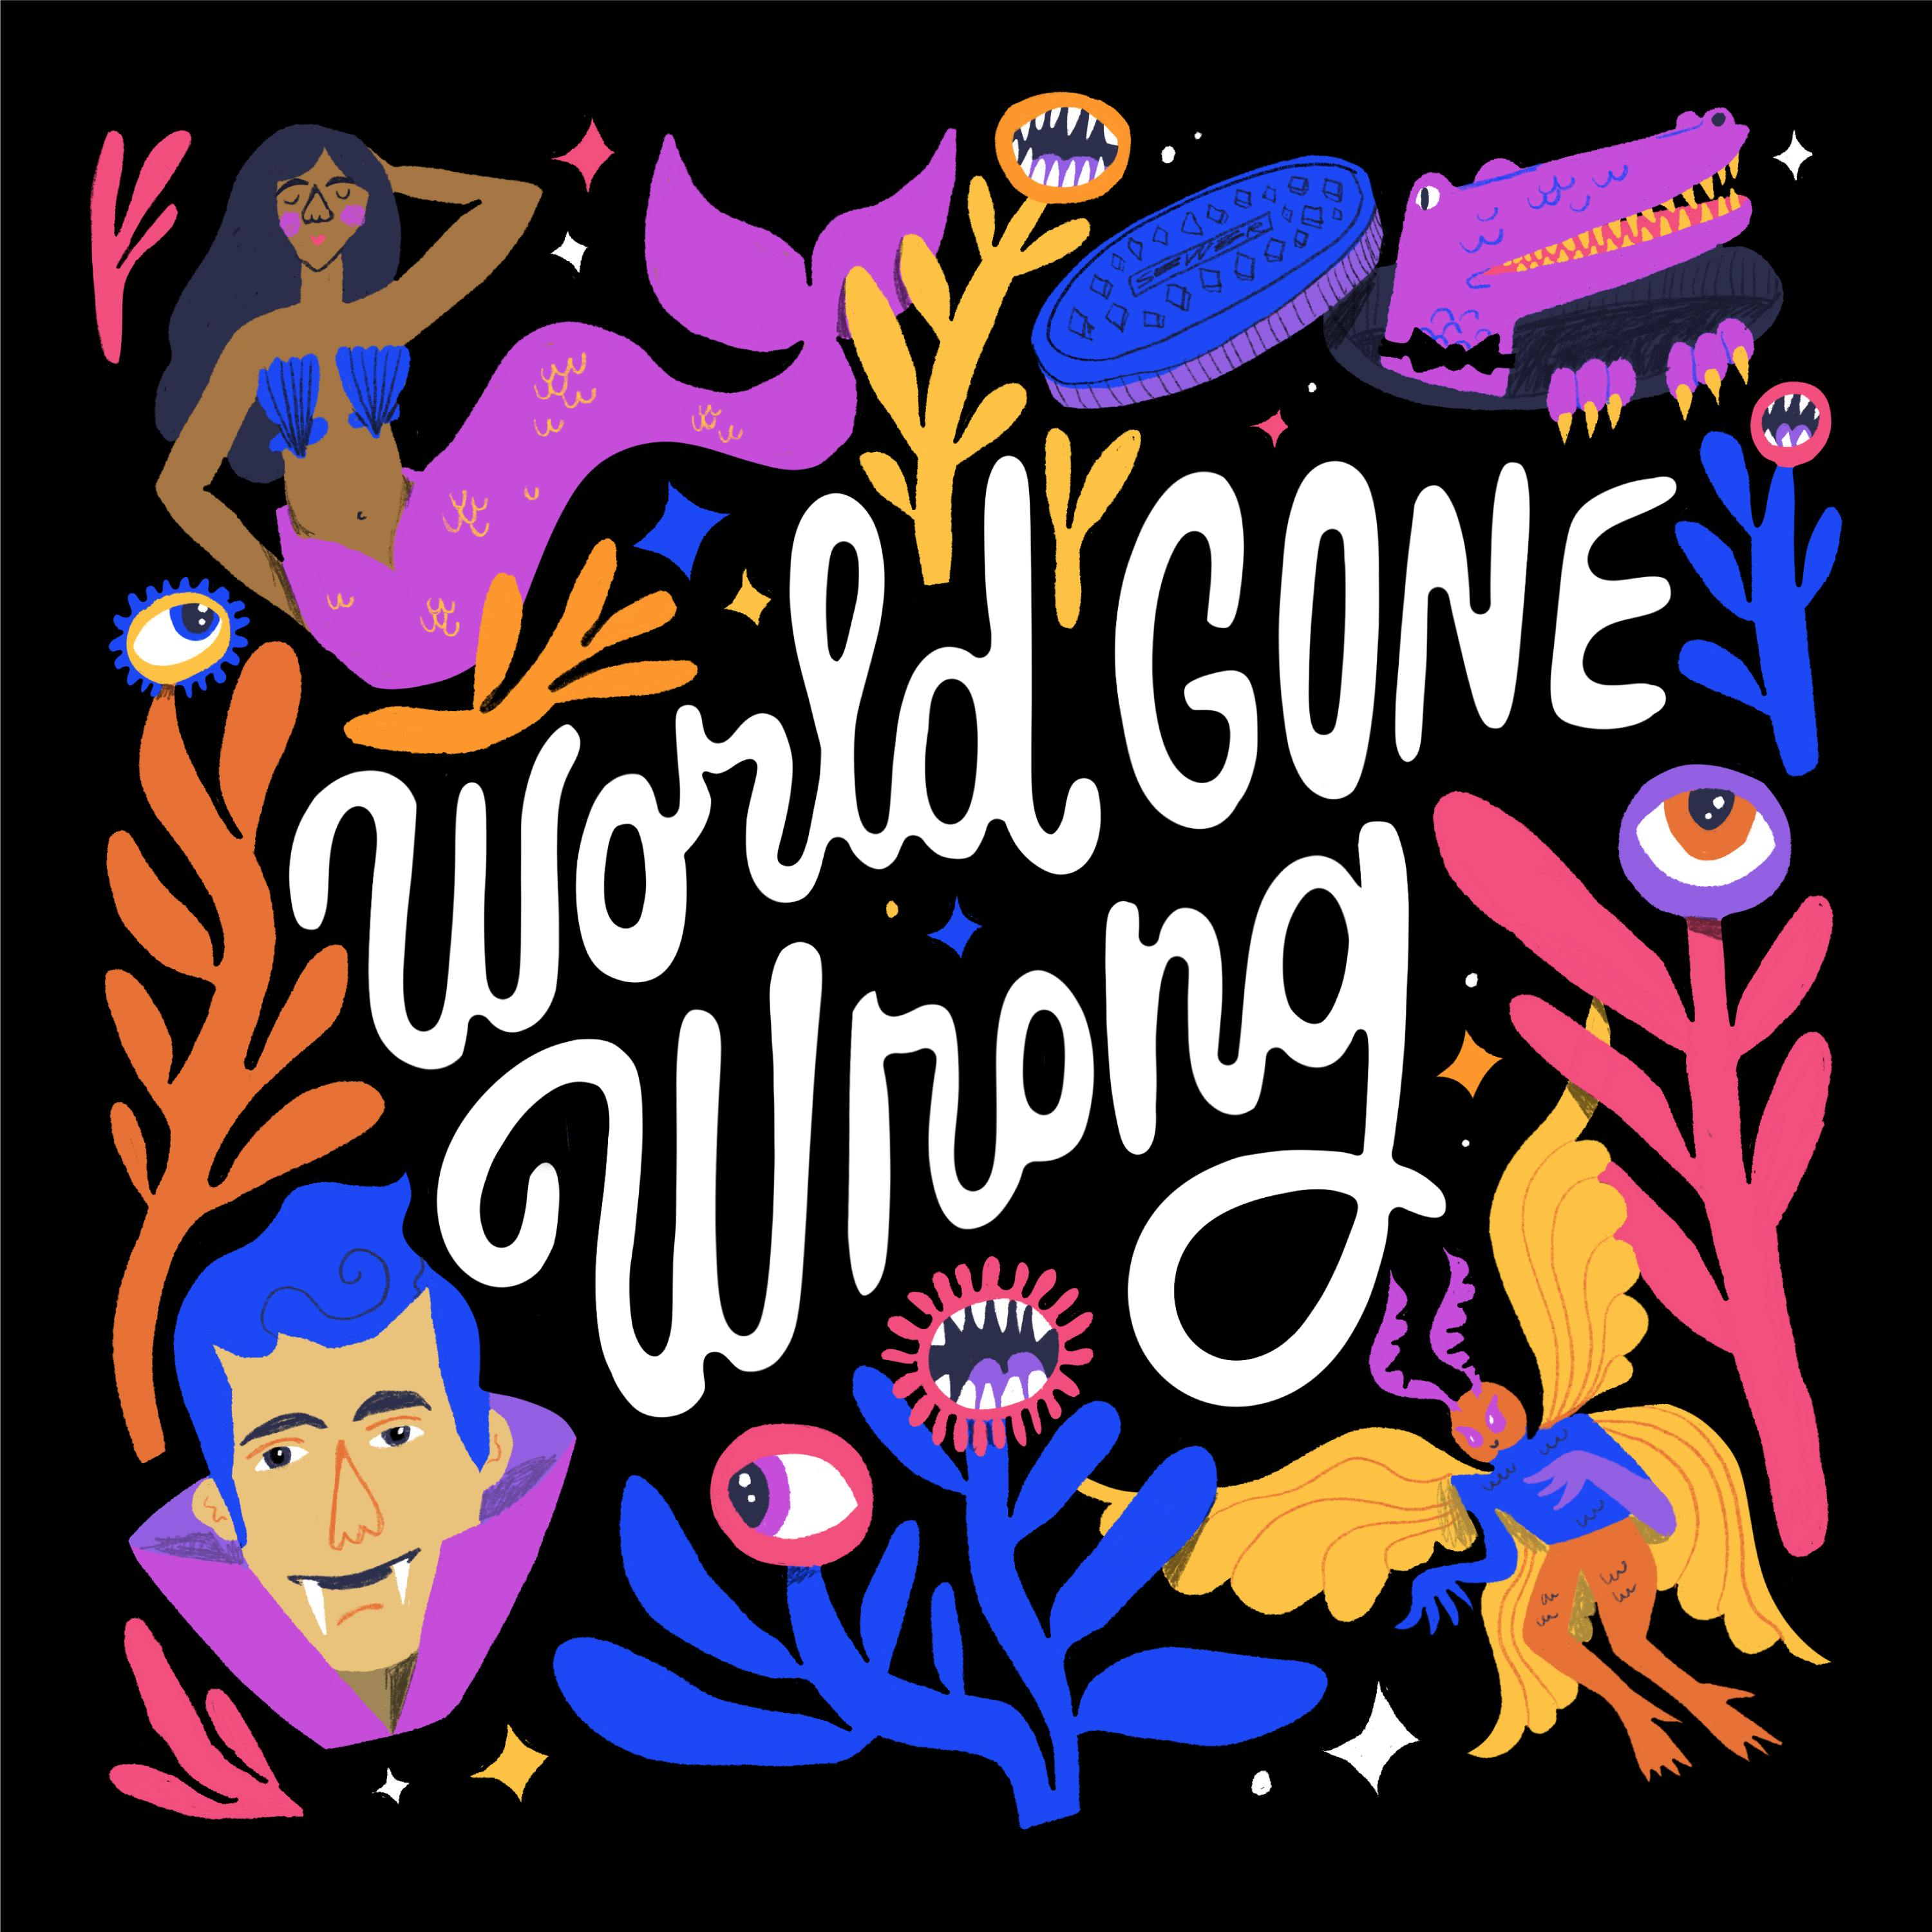 Introducing:  World Gone Wrong